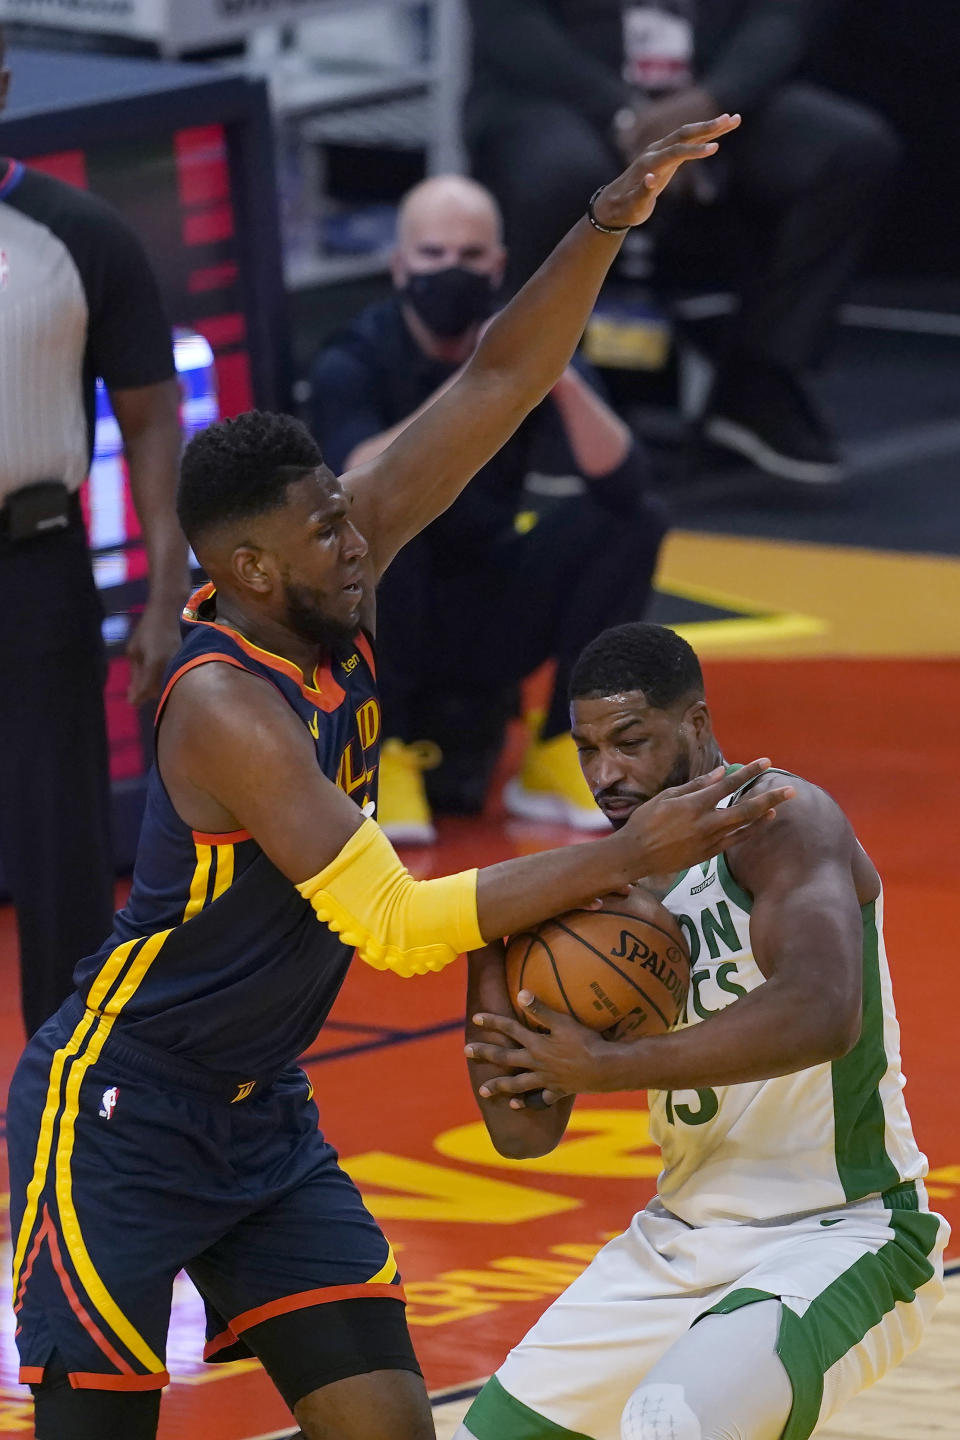 Boston Celtics forward Tristan Thompson, right, is defended by Golden State Warriors forward Kevon Looney during the first half of an NBA basketball game in San Francisco, Tuesday, Feb. 2, 2021. (AP Photo/Jeff Chiu)